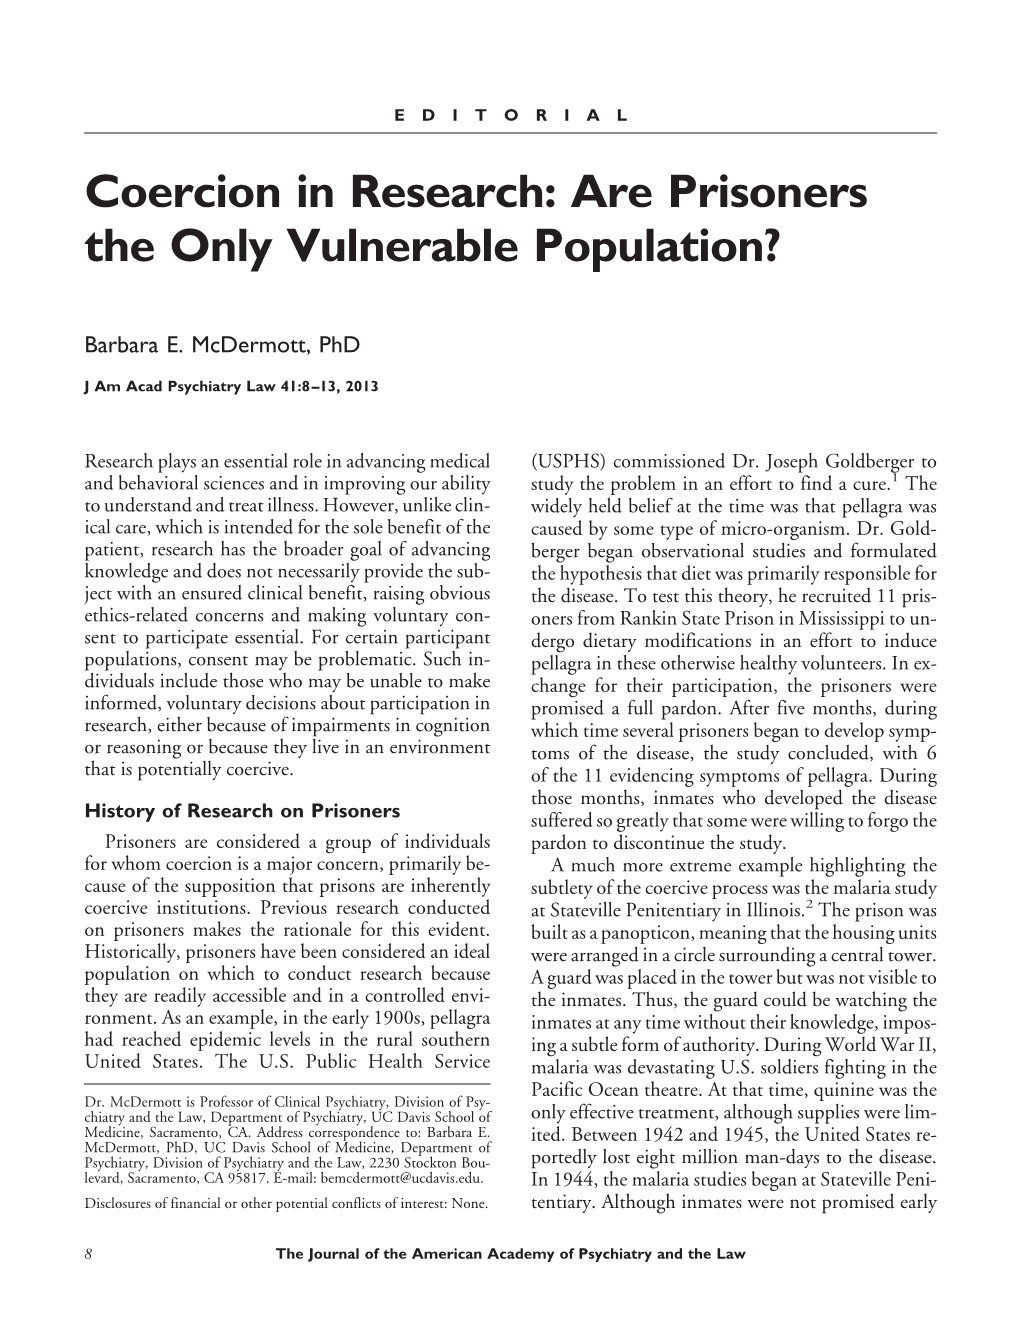 Are Prisoners the Only Vulnerable Population?